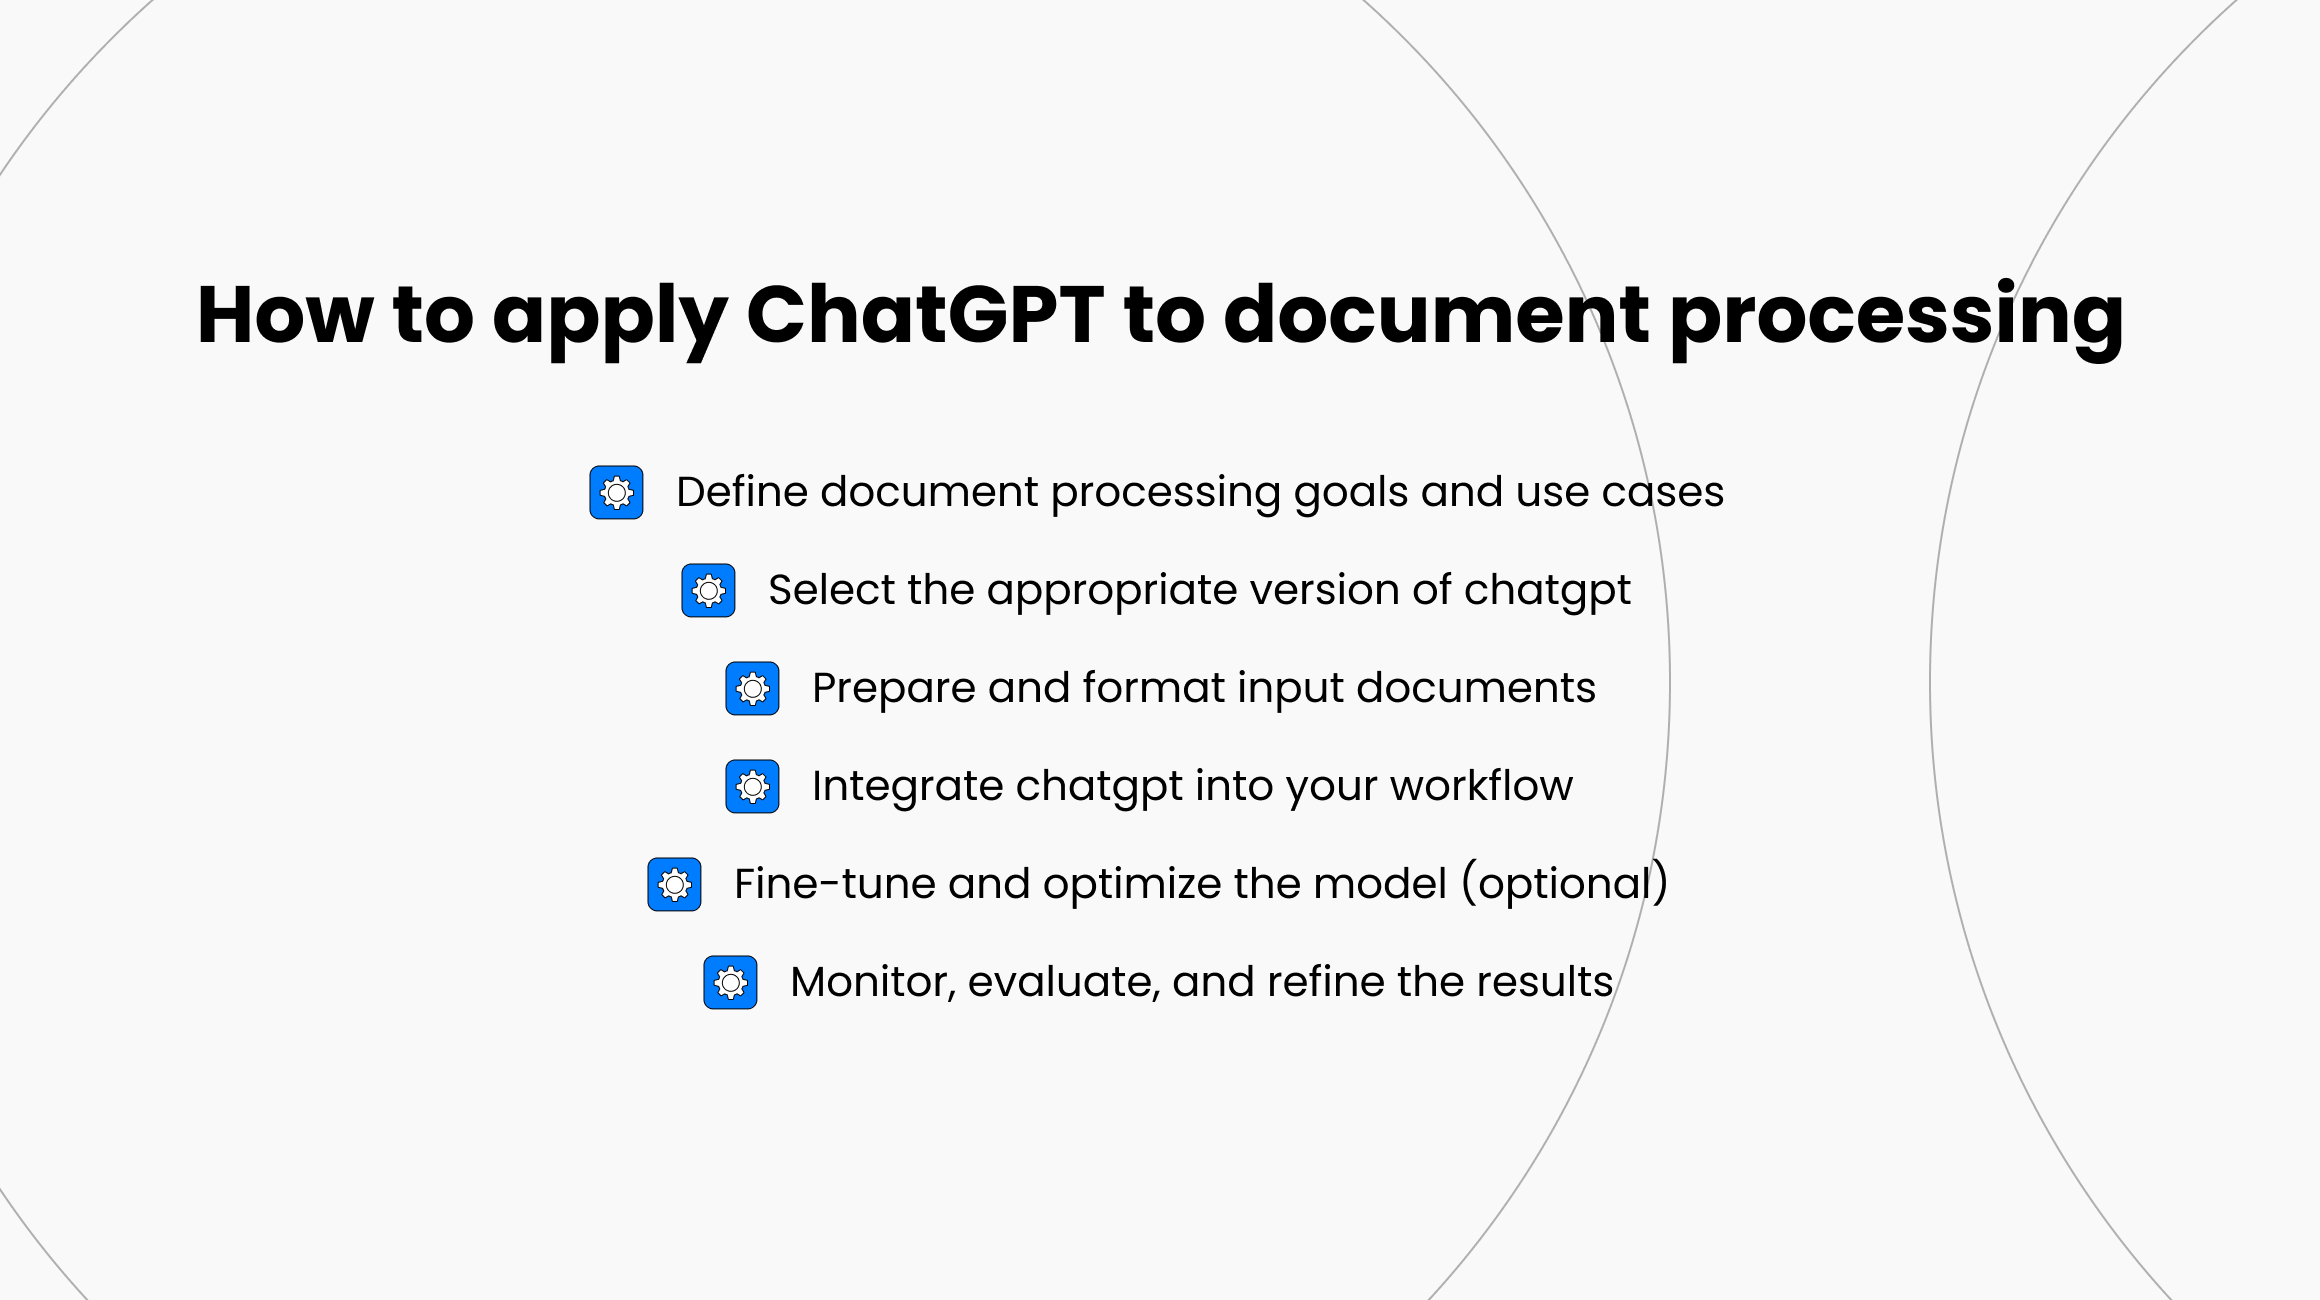 Steps to Implement ChatGPT in Document Processing